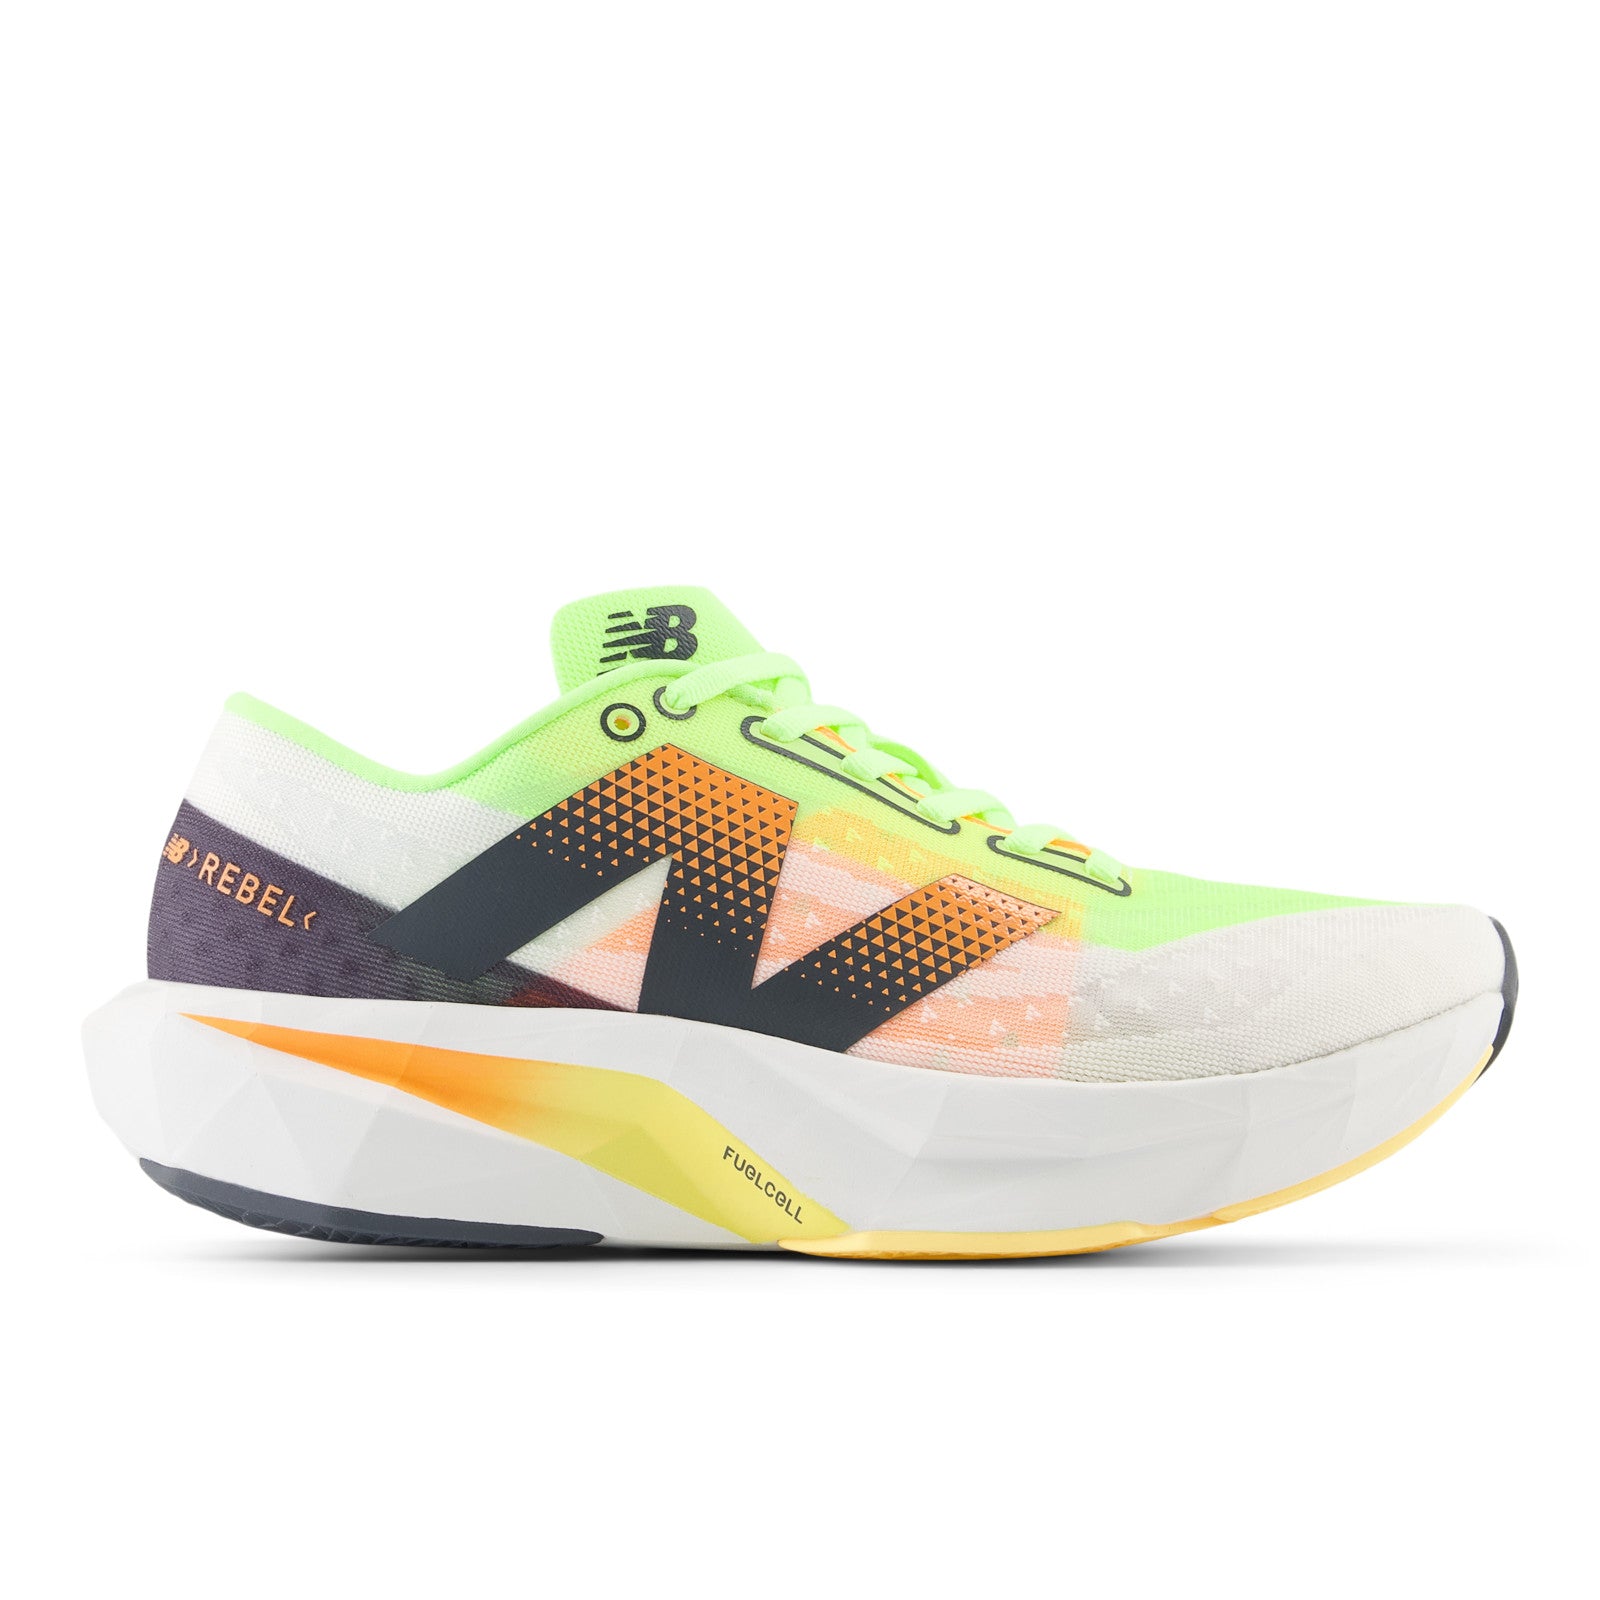 NEW BALANCE MEN'S FUELCELL REBEL V4 - D - LL4 WHITE/BLEACHED LIME GLO 7.0